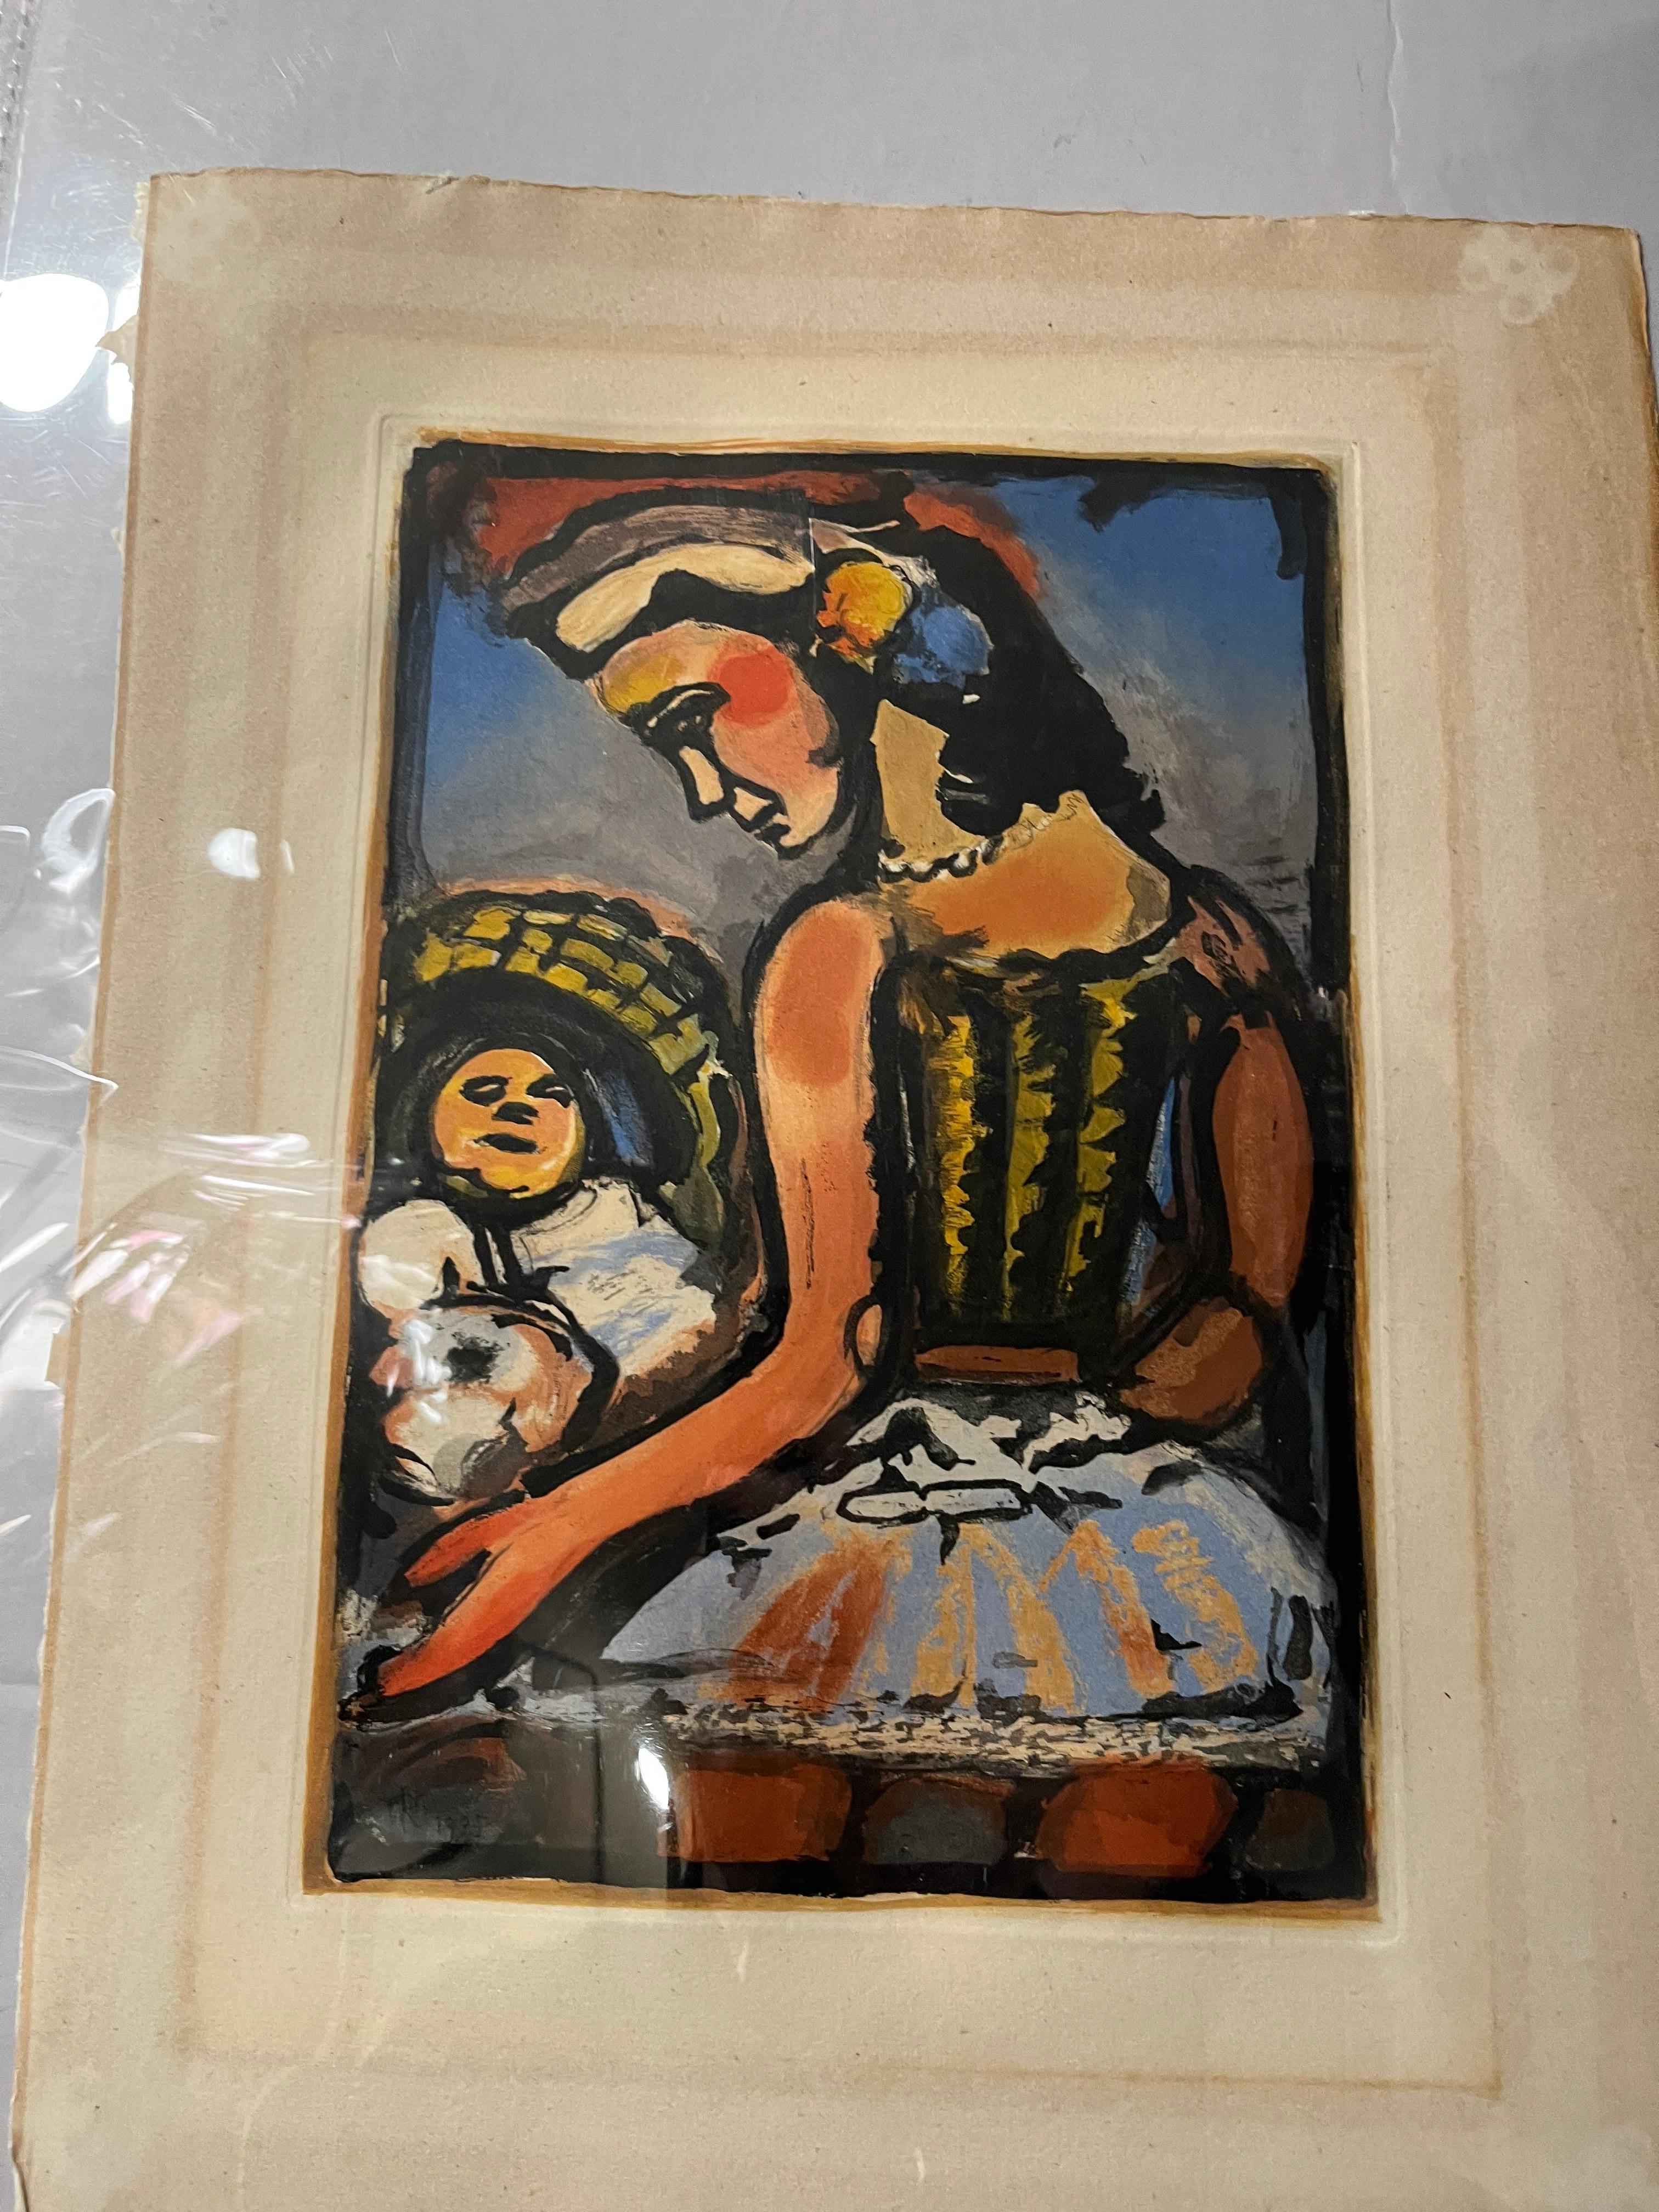 Dors mon amour - Print by Georges Rouault